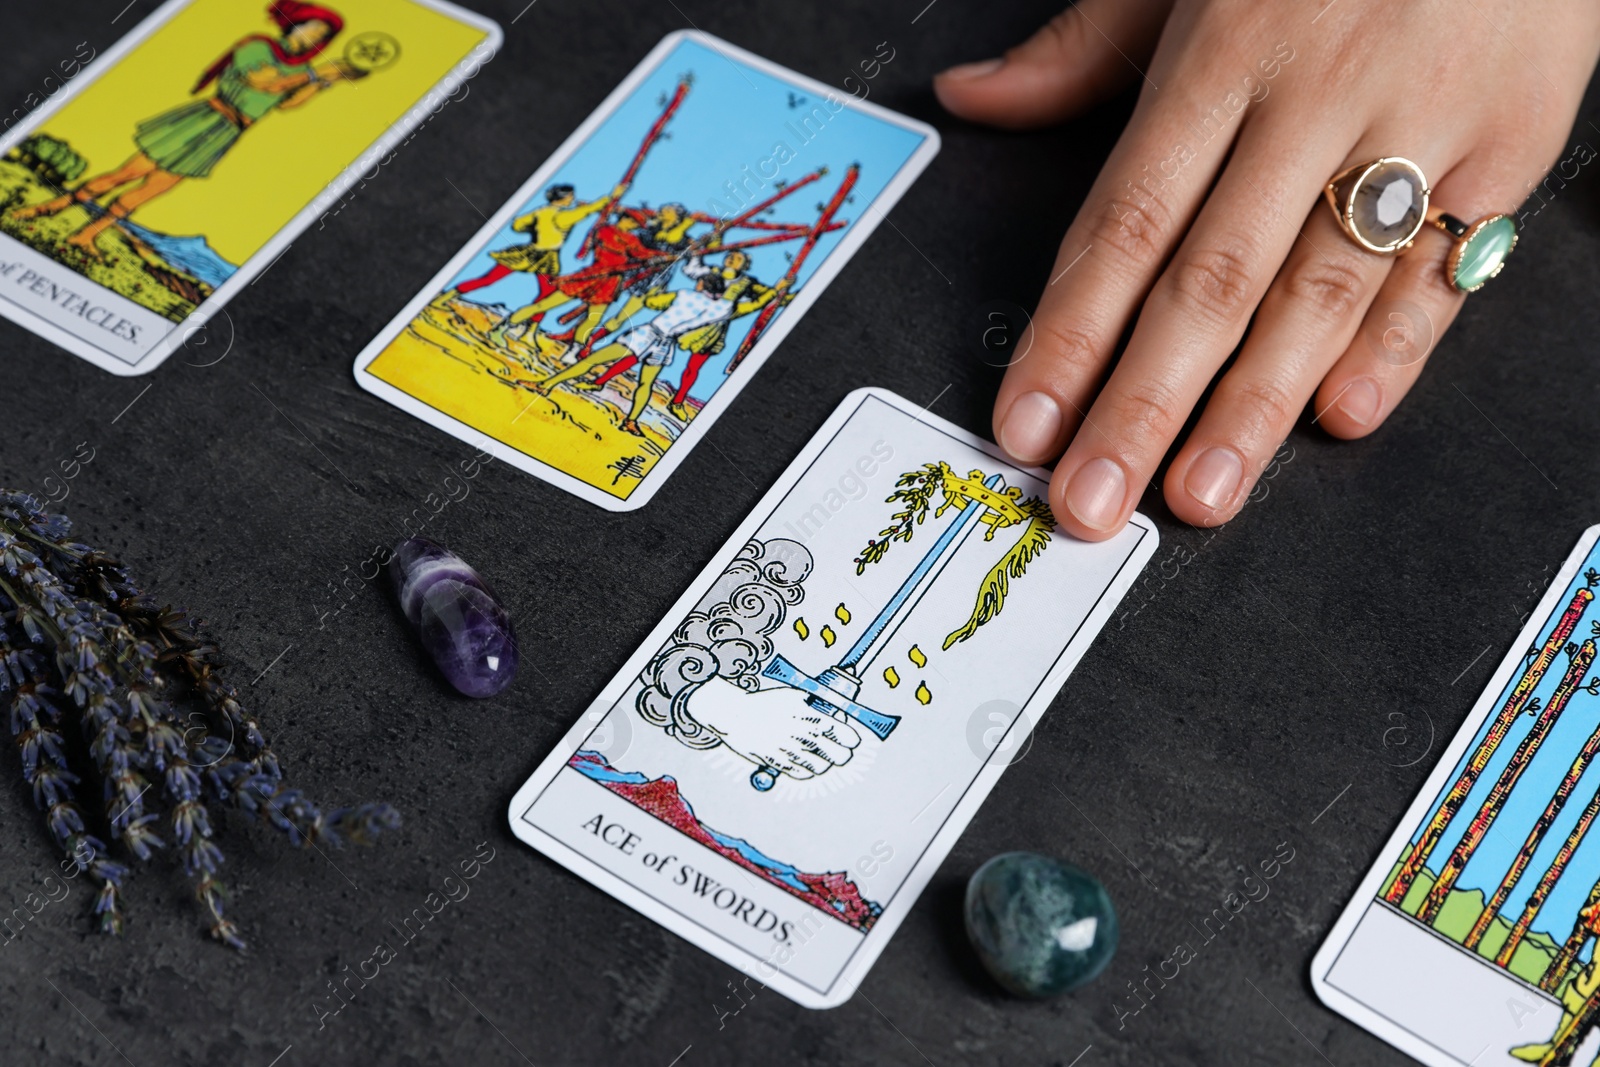 Photo of Fortune teller predicting future on spread of tarot cards at grey table, closeup